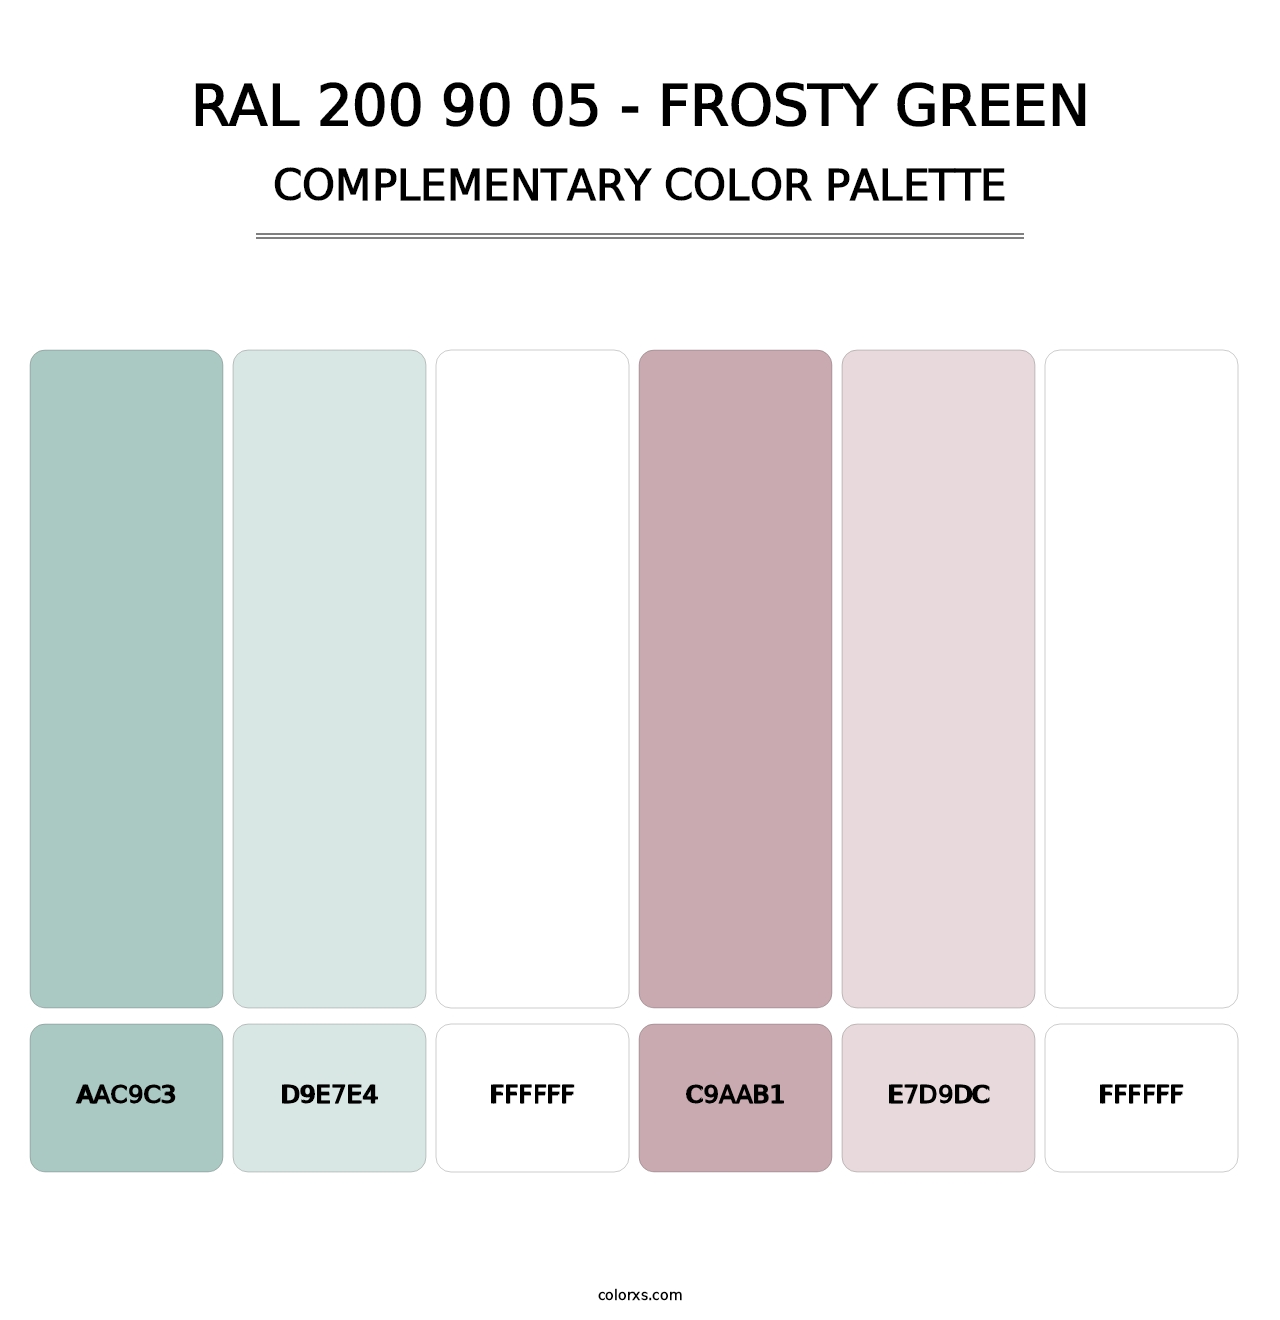 RAL 200 90 05 - Frosty Green - Complementary Color Palette